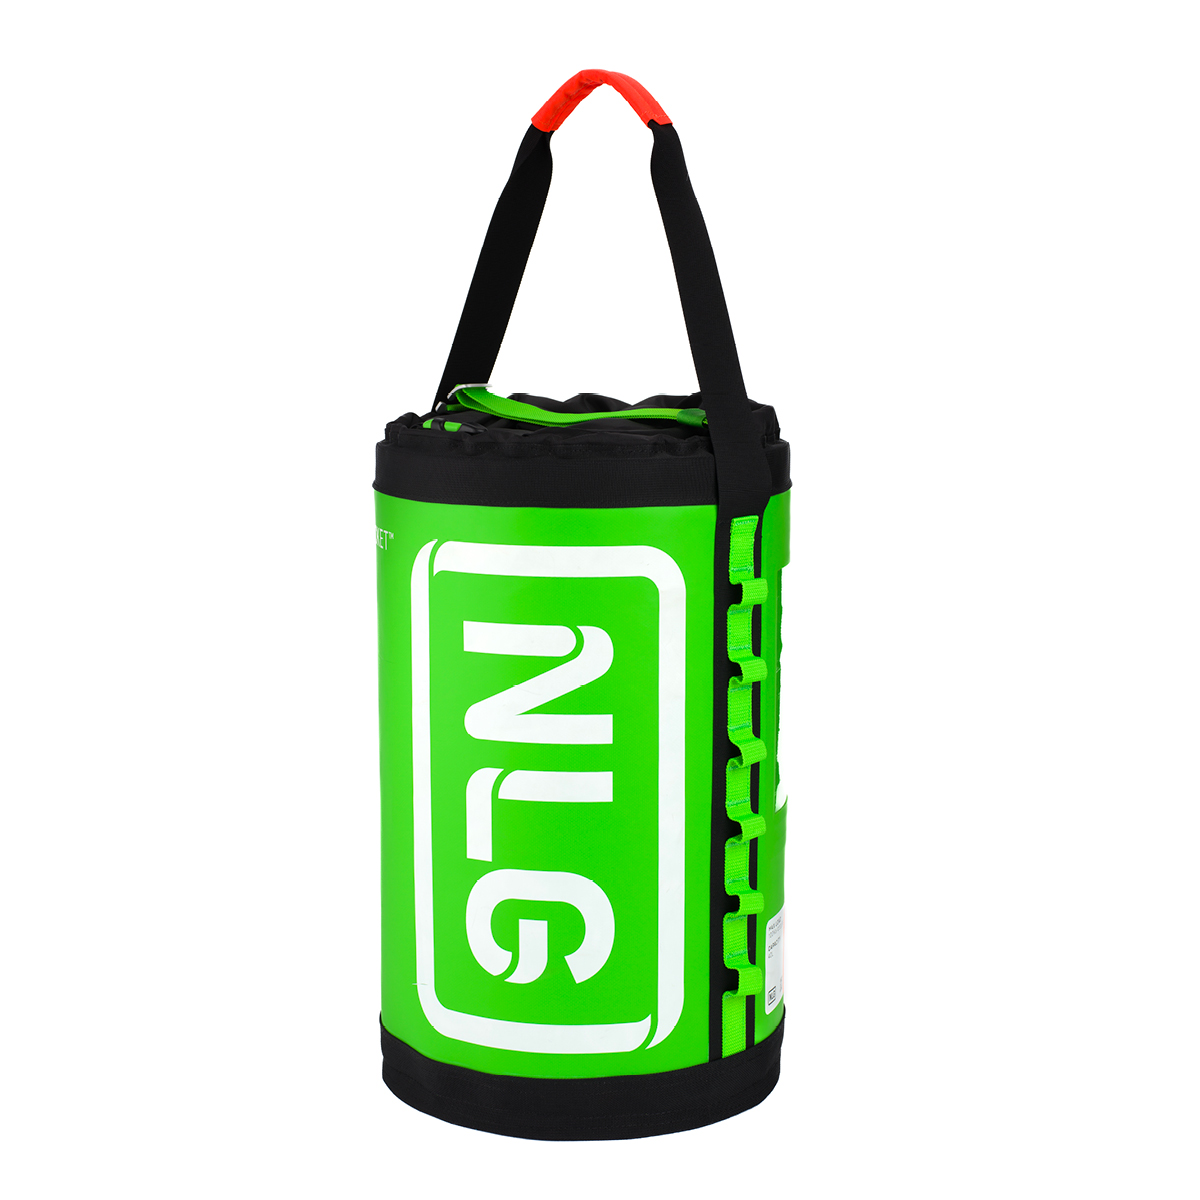 NLG Ascent Bucket from GME Supply